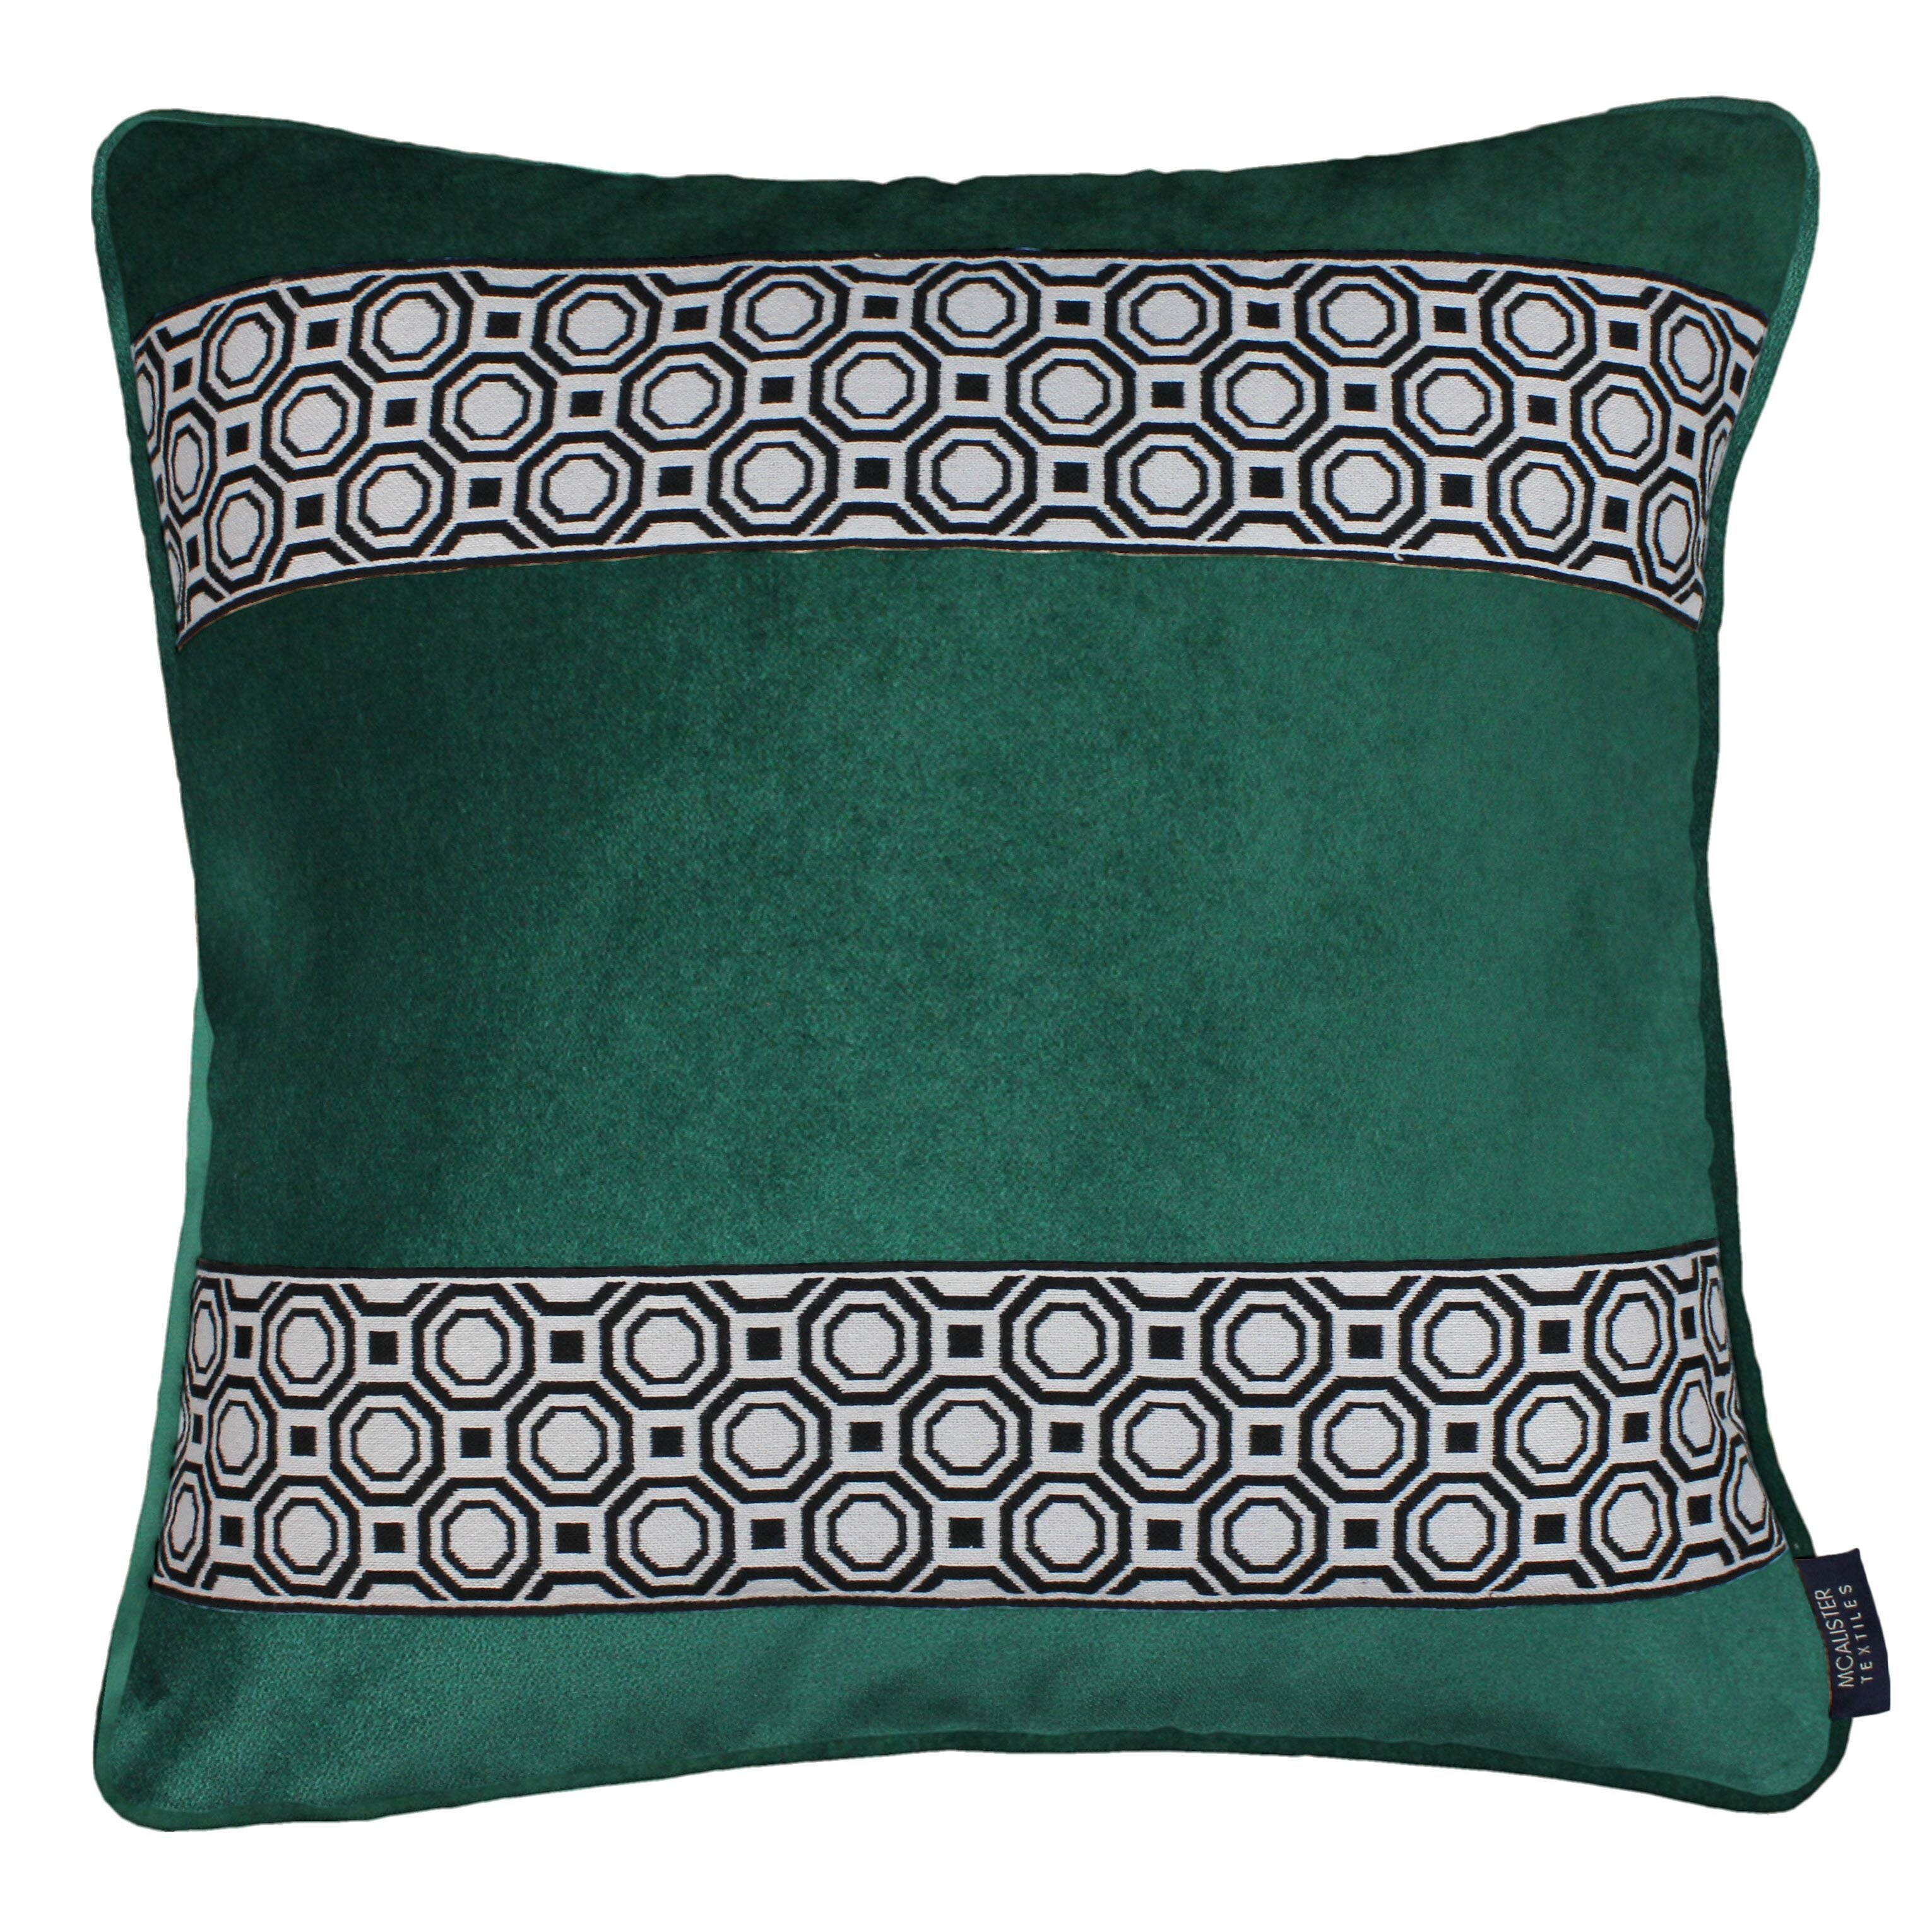 McAlister Textiles Cancun Striped Emerald Green Velvet Cushion Cushions and Covers Polyester Filler 43cm x 43cm 